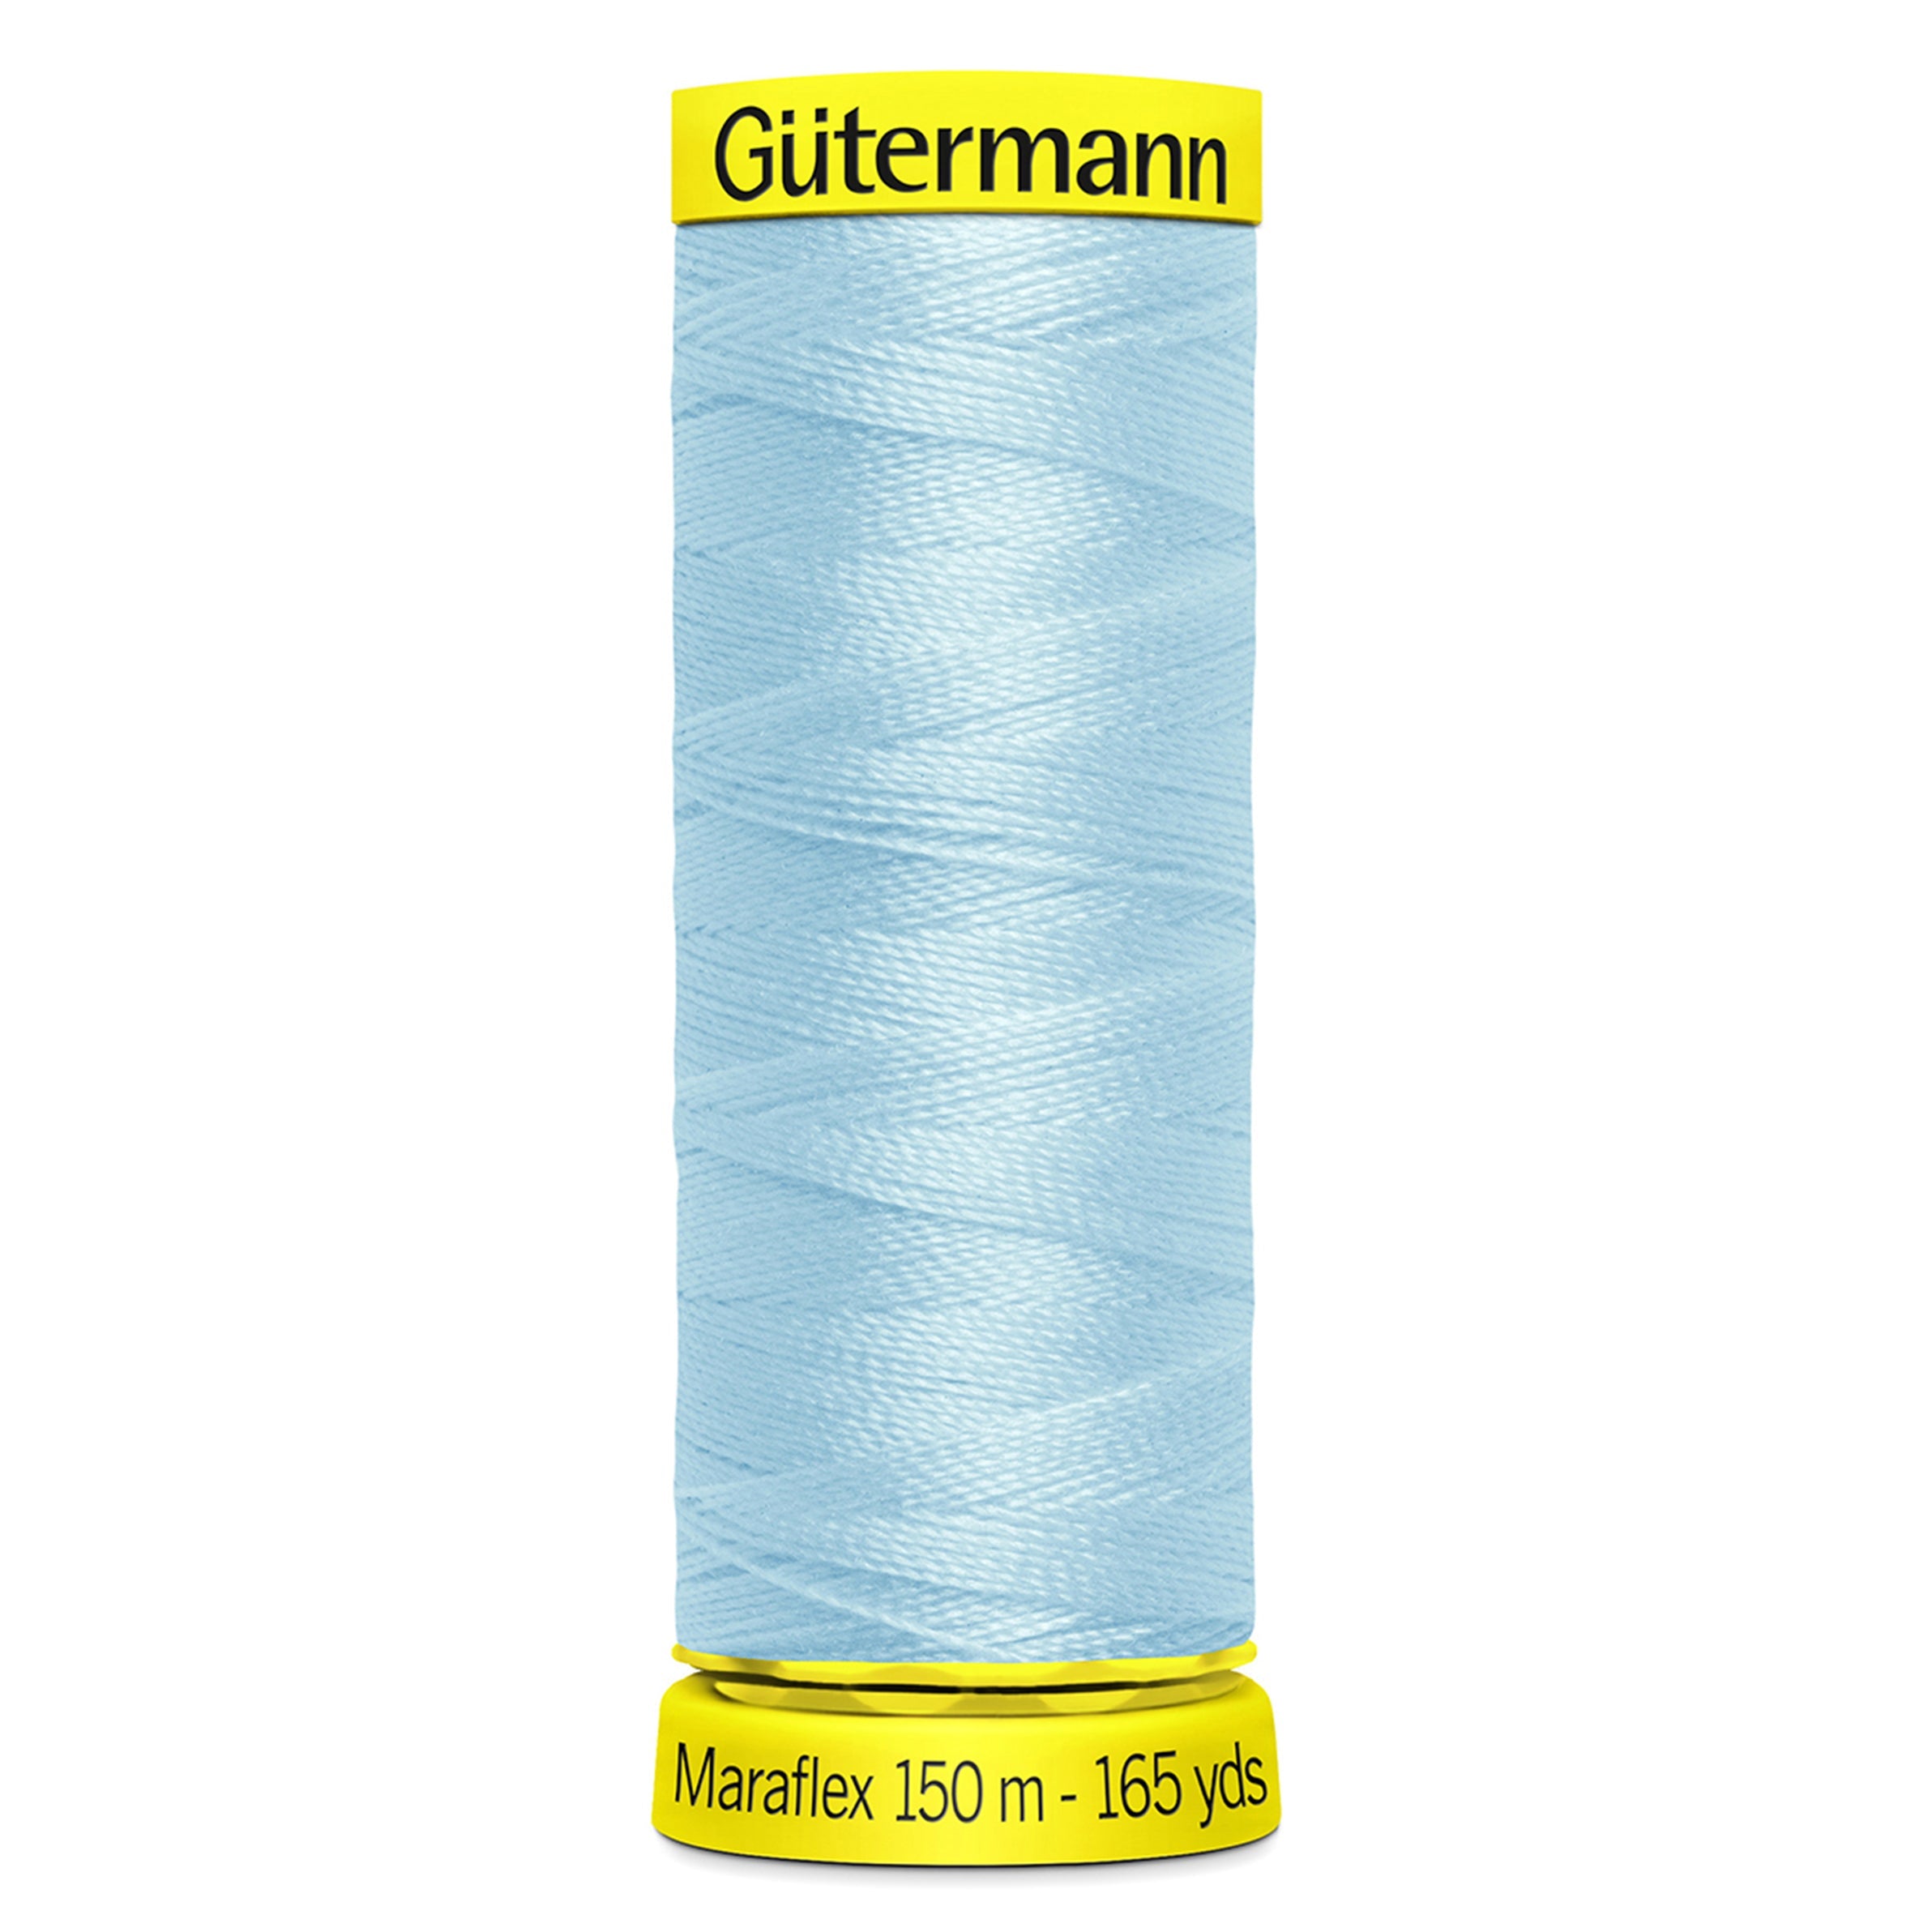 Gutermann Maraflex Stretchy Sewing Thread 150m colour 195 from Jaycotts Sewing Supplies